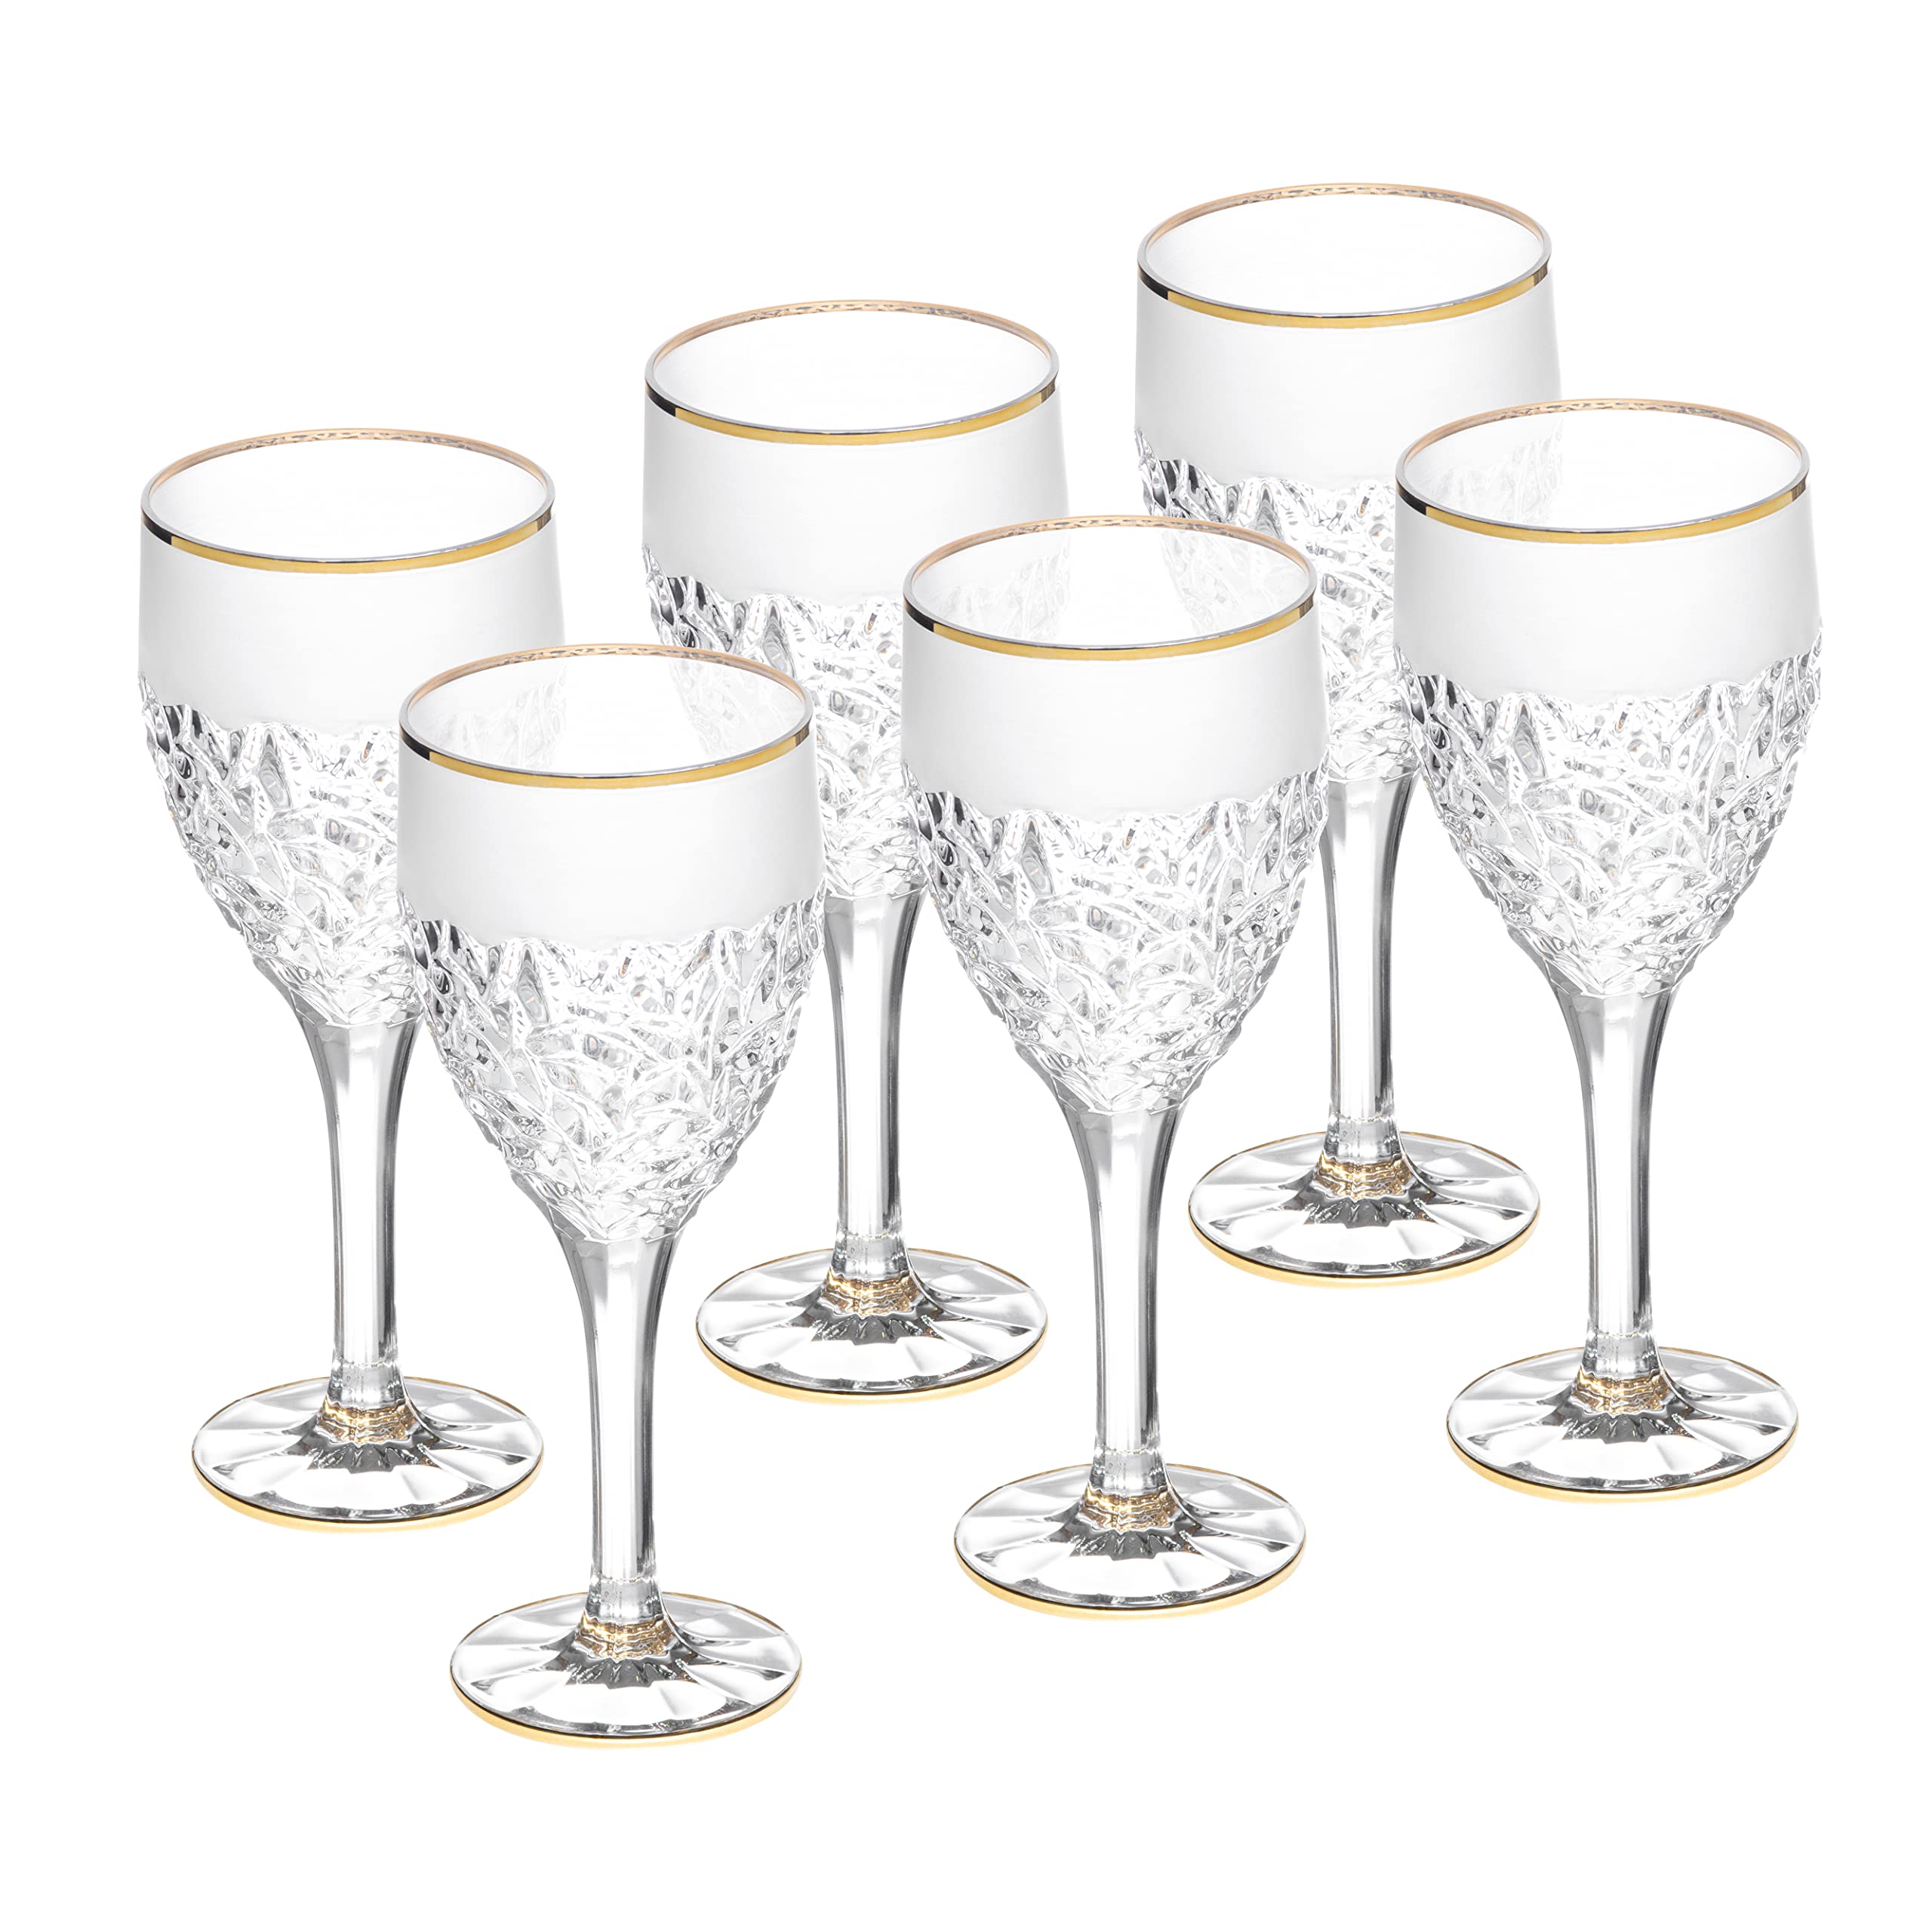 Barski Goblet - Wine Glass - Water Glass - Crystal - Set of 6 Stemmed Glasses - Glass is designed With with Frosted Border and Gold Rim - 11 oz Made in Europe -